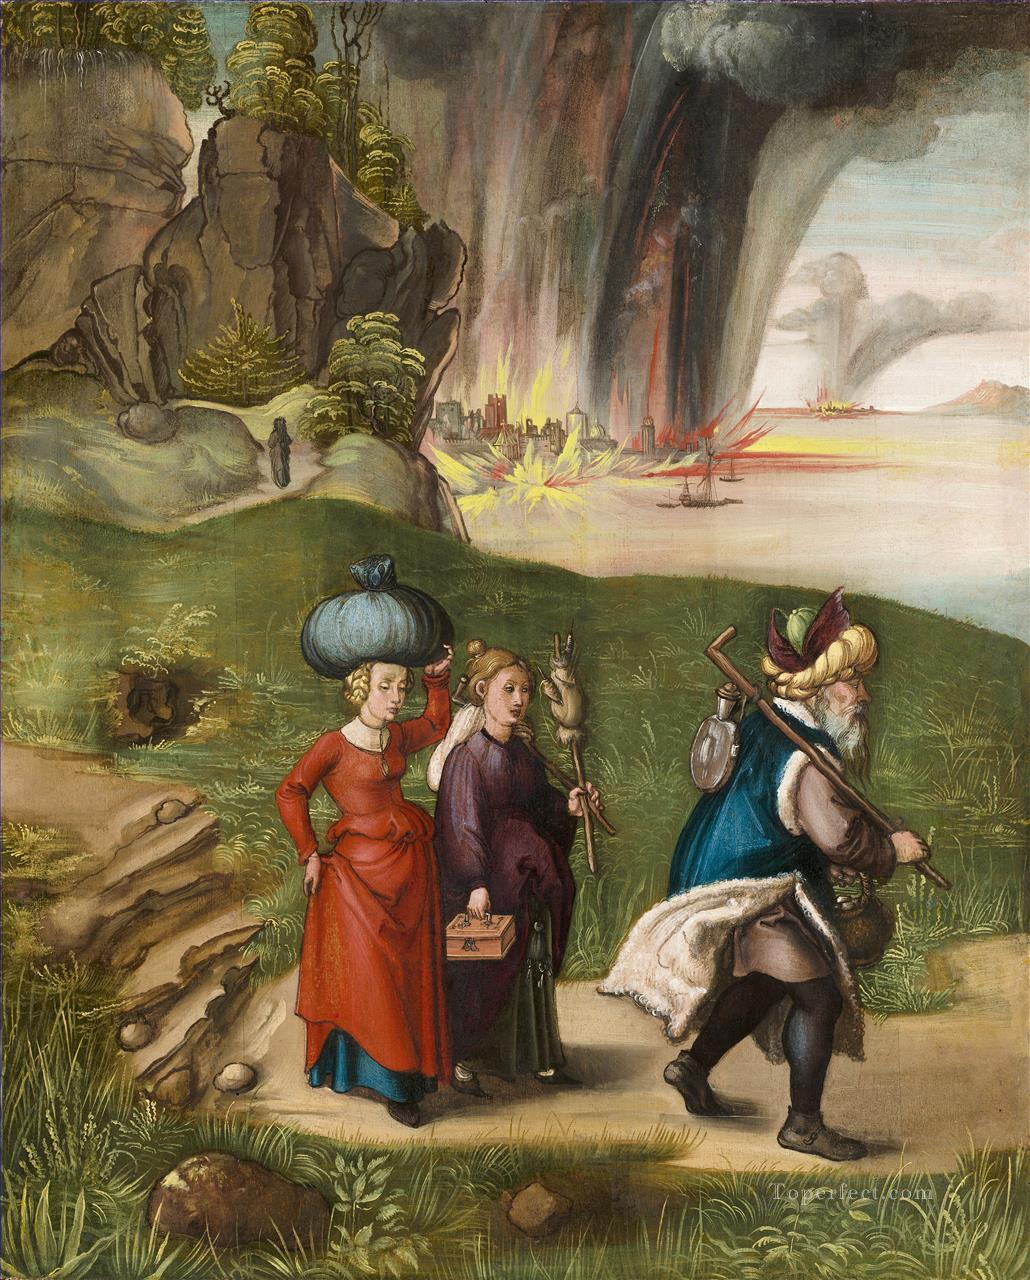 Lot Fleeing with his Daughters from Sodom Nothern Renaissance Albrecht Durer Oil Paintings